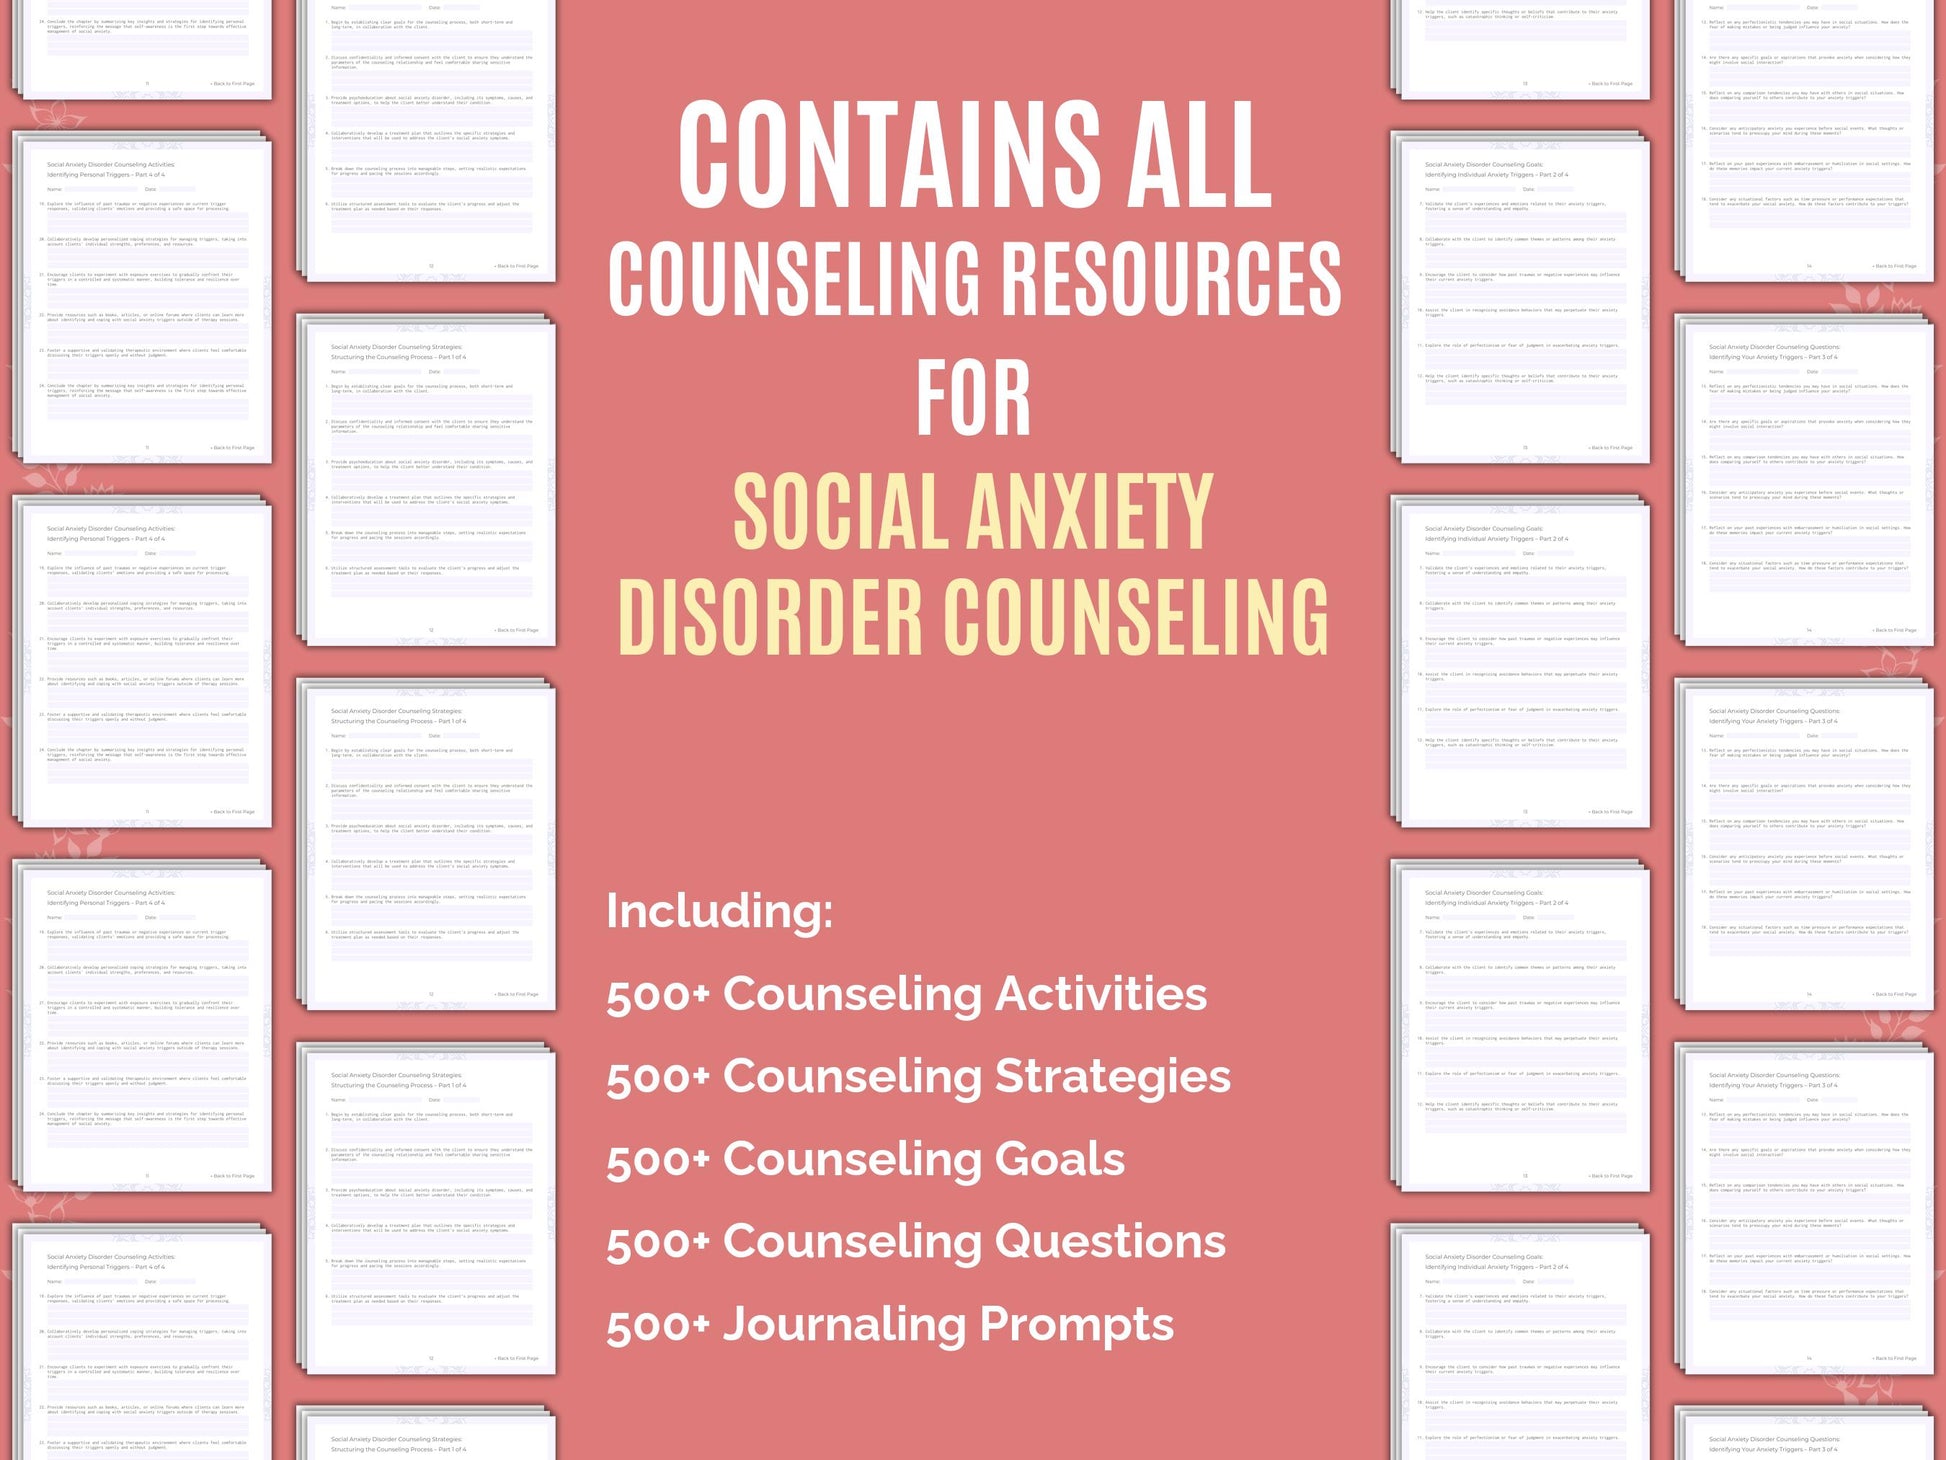 Therapist, Social Counseling, Social Template, Disorder, Anxiety, Social Workbook, Social Therapy, Mental Health, Social Worksheet, Social Bundle, Counselor, Social Idea, Social Resource